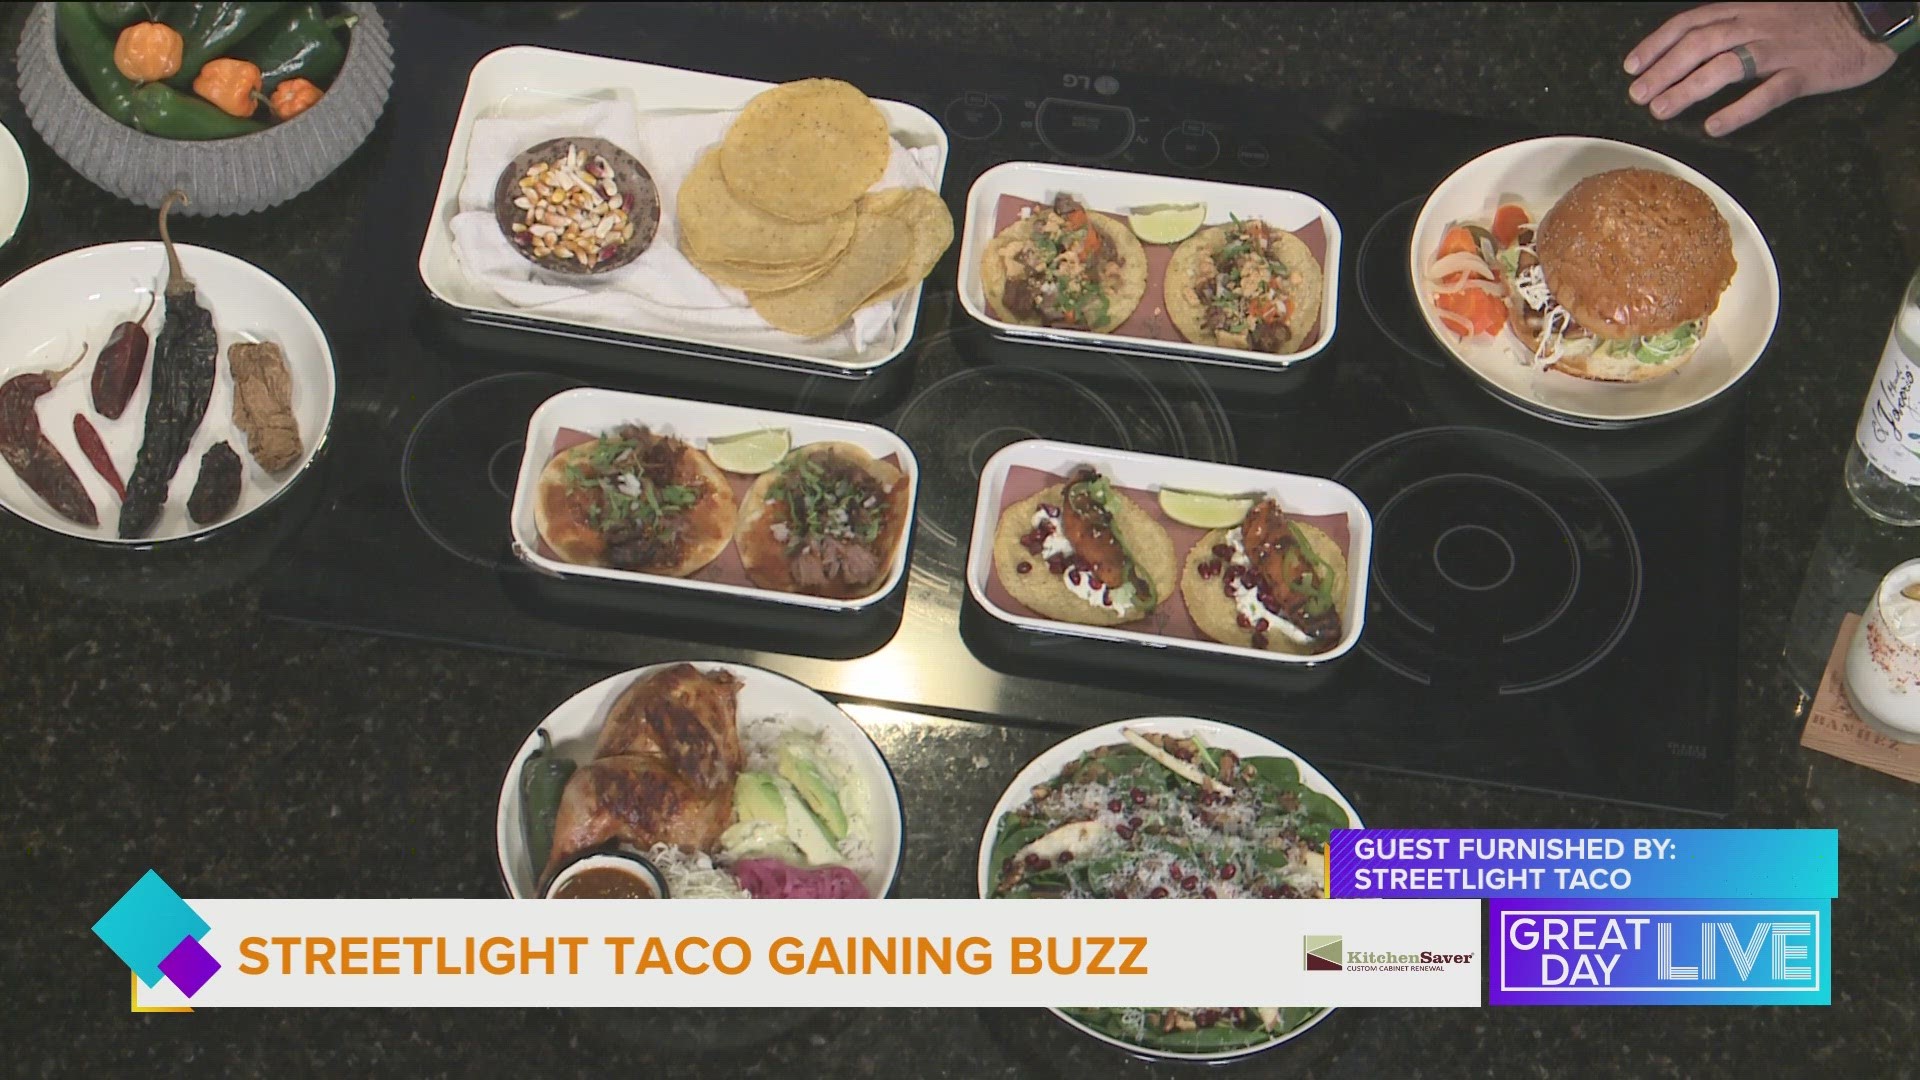 6 new Tampa restaurants were added to Florida's Michelin Guide. One of those restaurants was Streetlight taco.